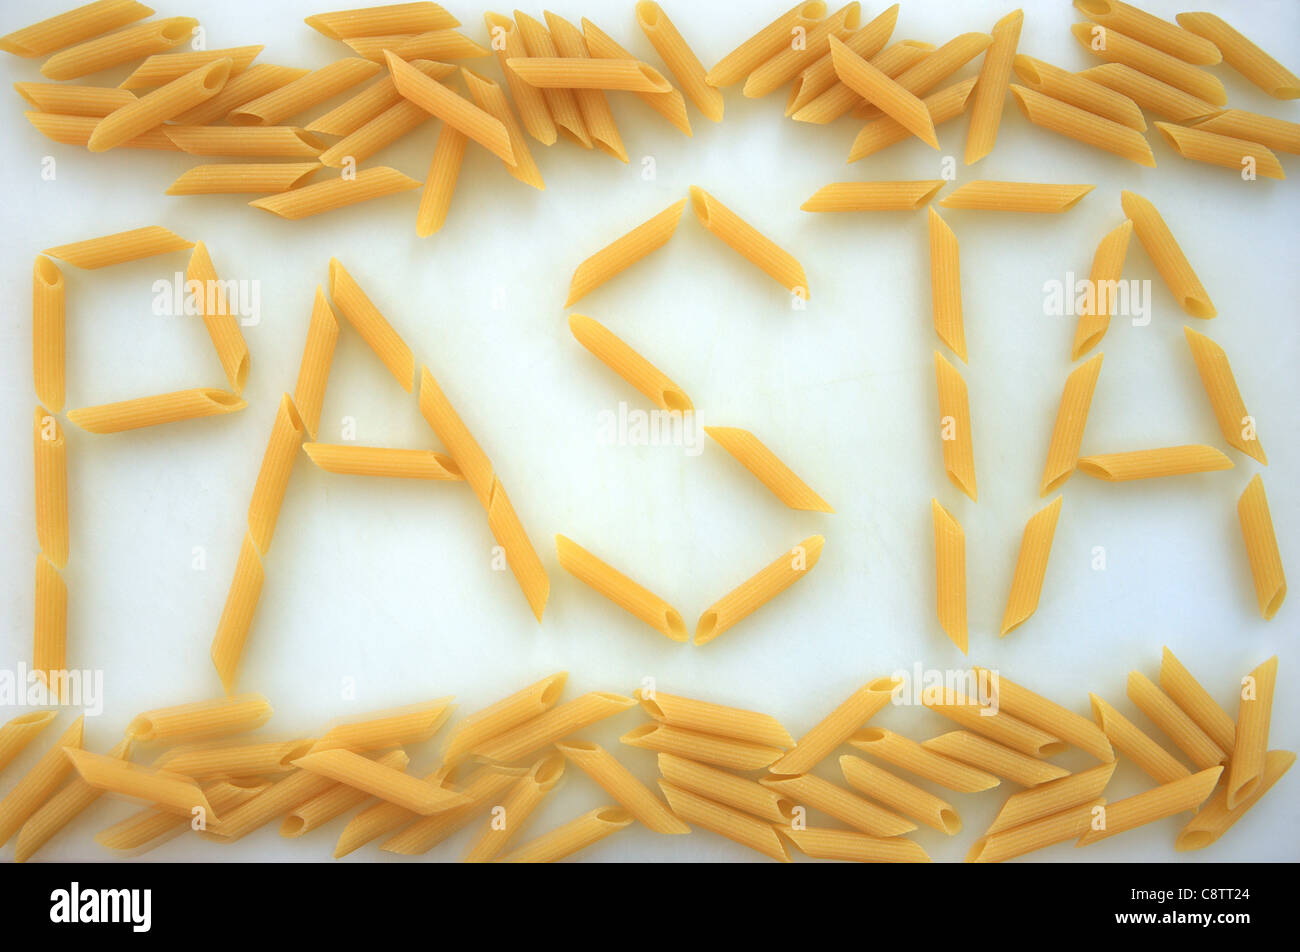 Pasta spelled out using penne pasta on a white background Stock Photo